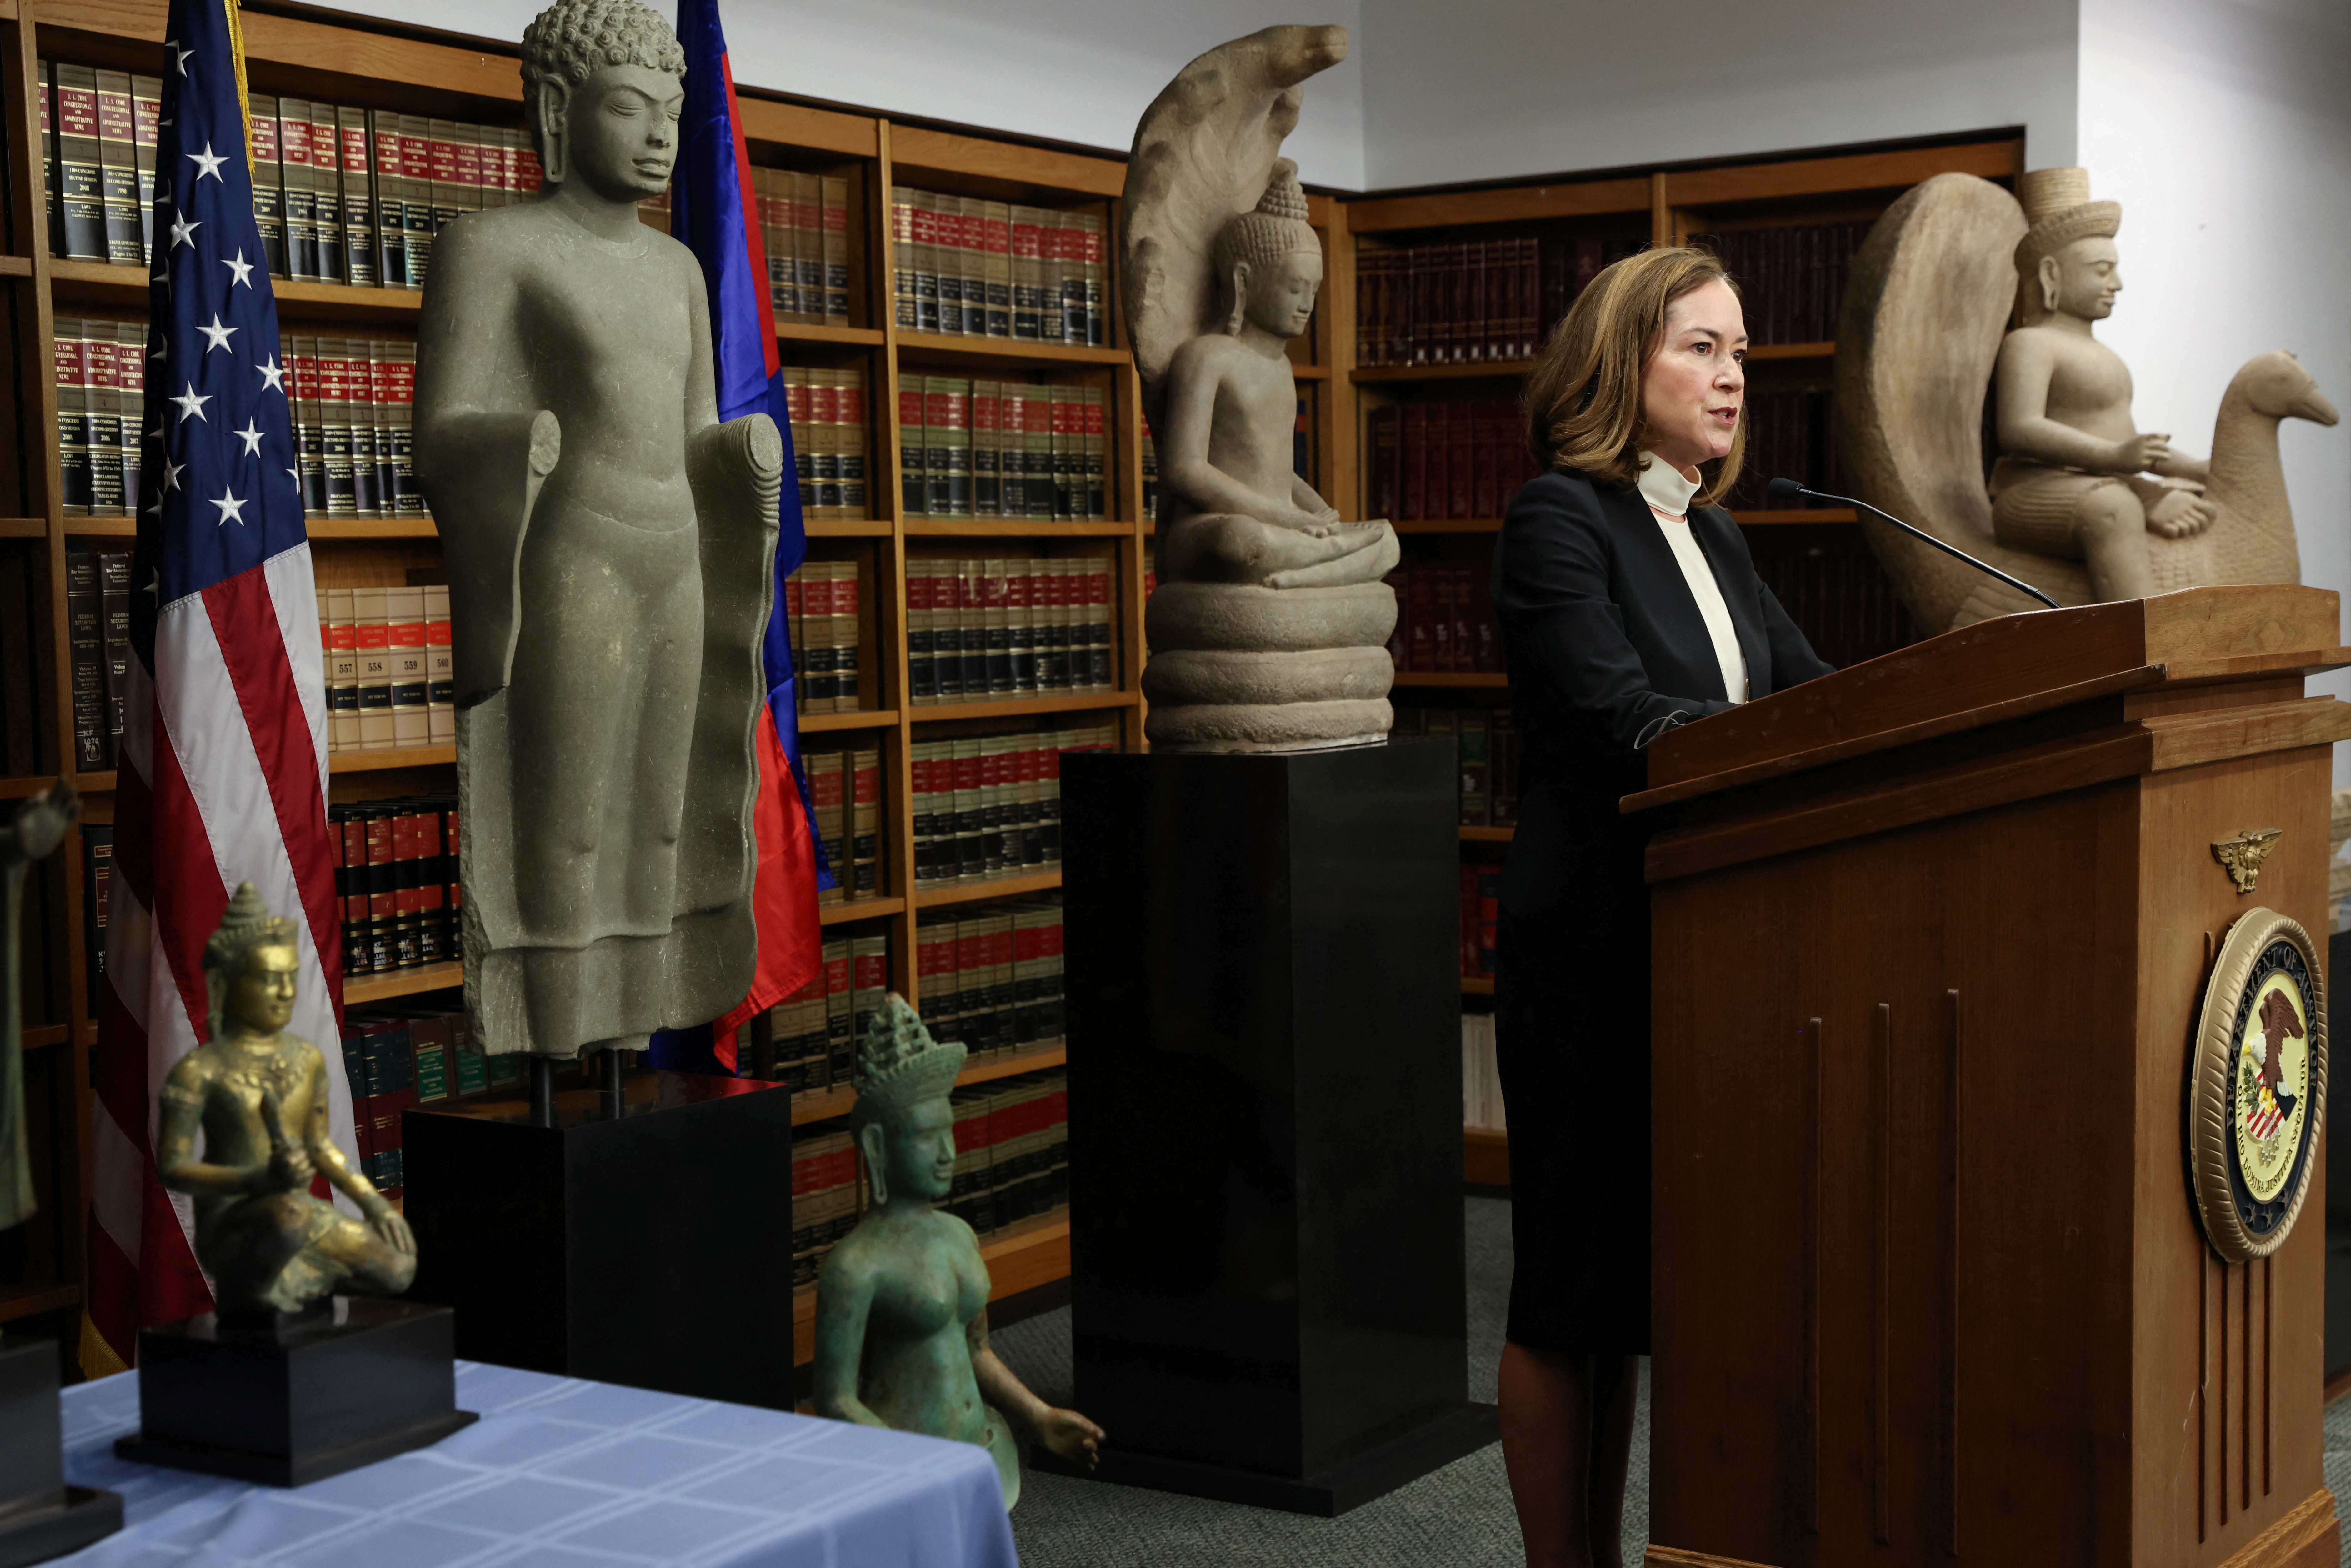 Repatriation and return to Cambodia of Cambodian antiquities seized by the U.S. Attorney’s Office in Manhattan, New York City